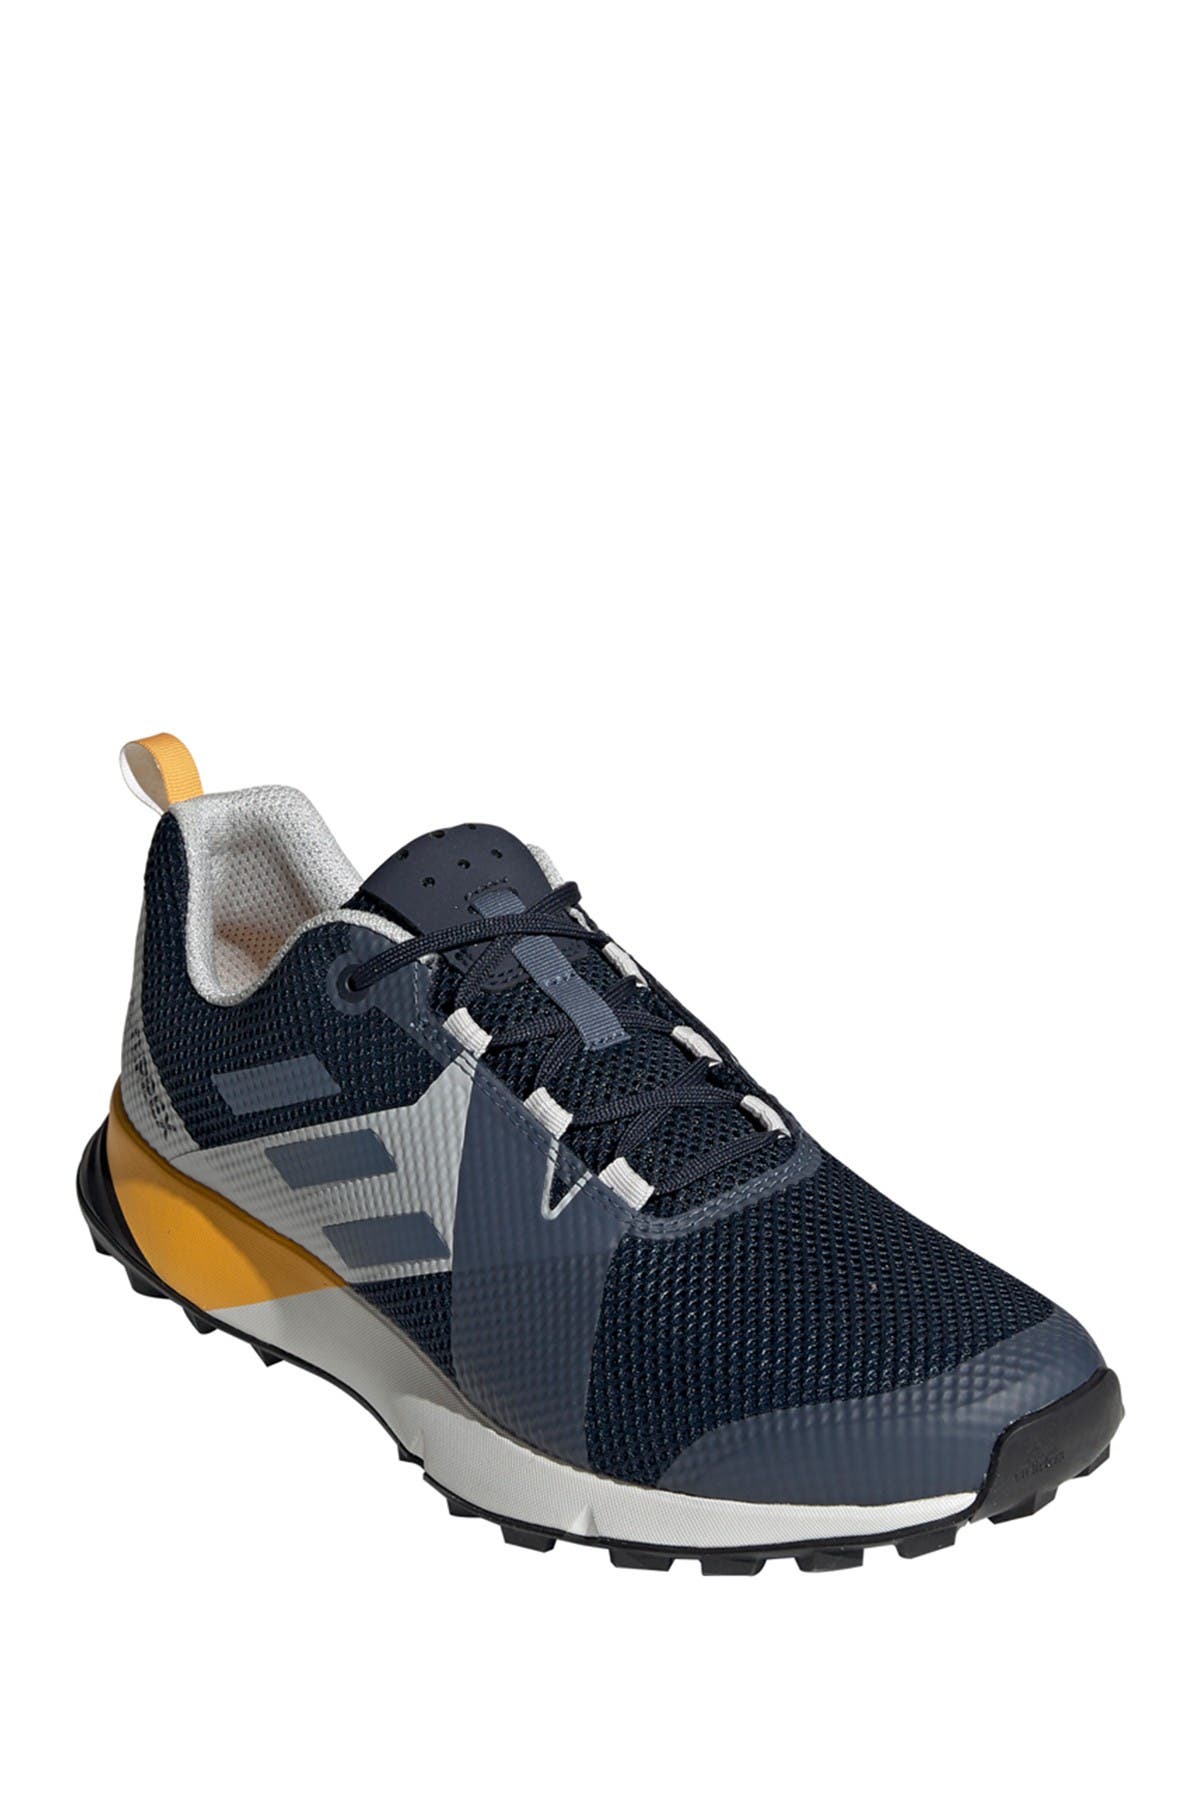 adidas | Terrex Two Trail Running Shoes 